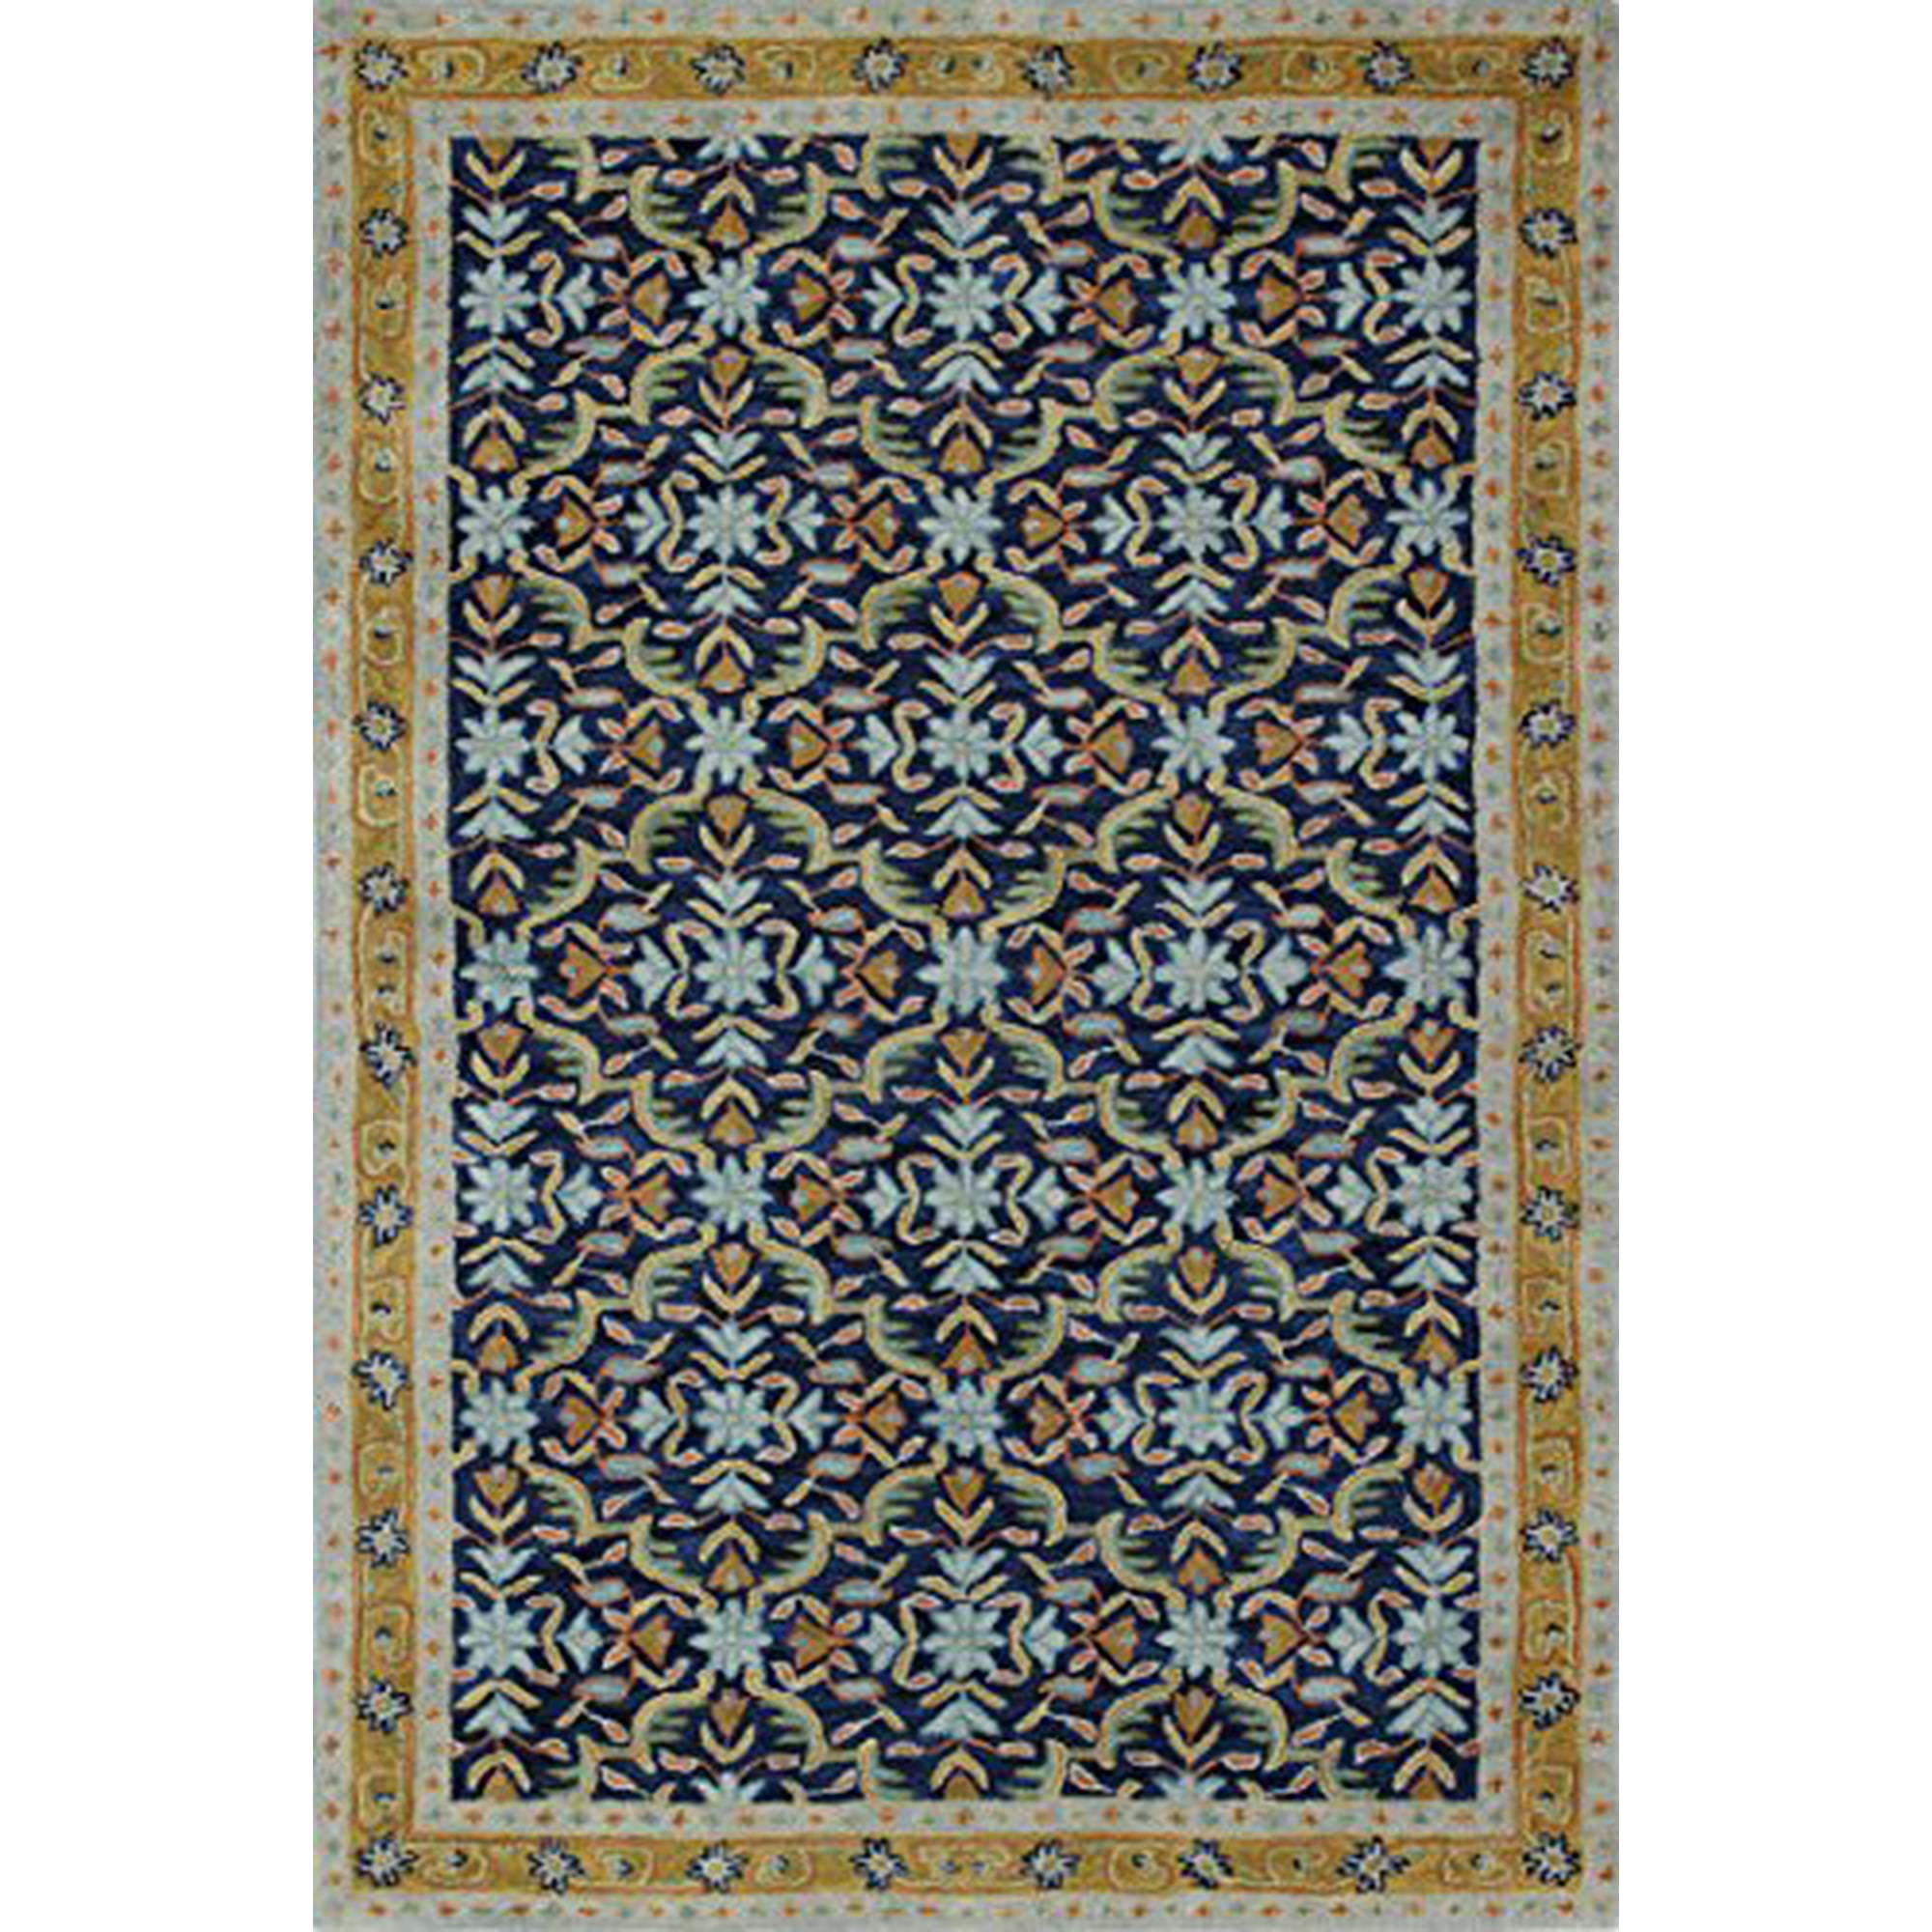 Bashian R128 Nv 9x12 Hg136 Wilshire, Wilshire Rugs Collection